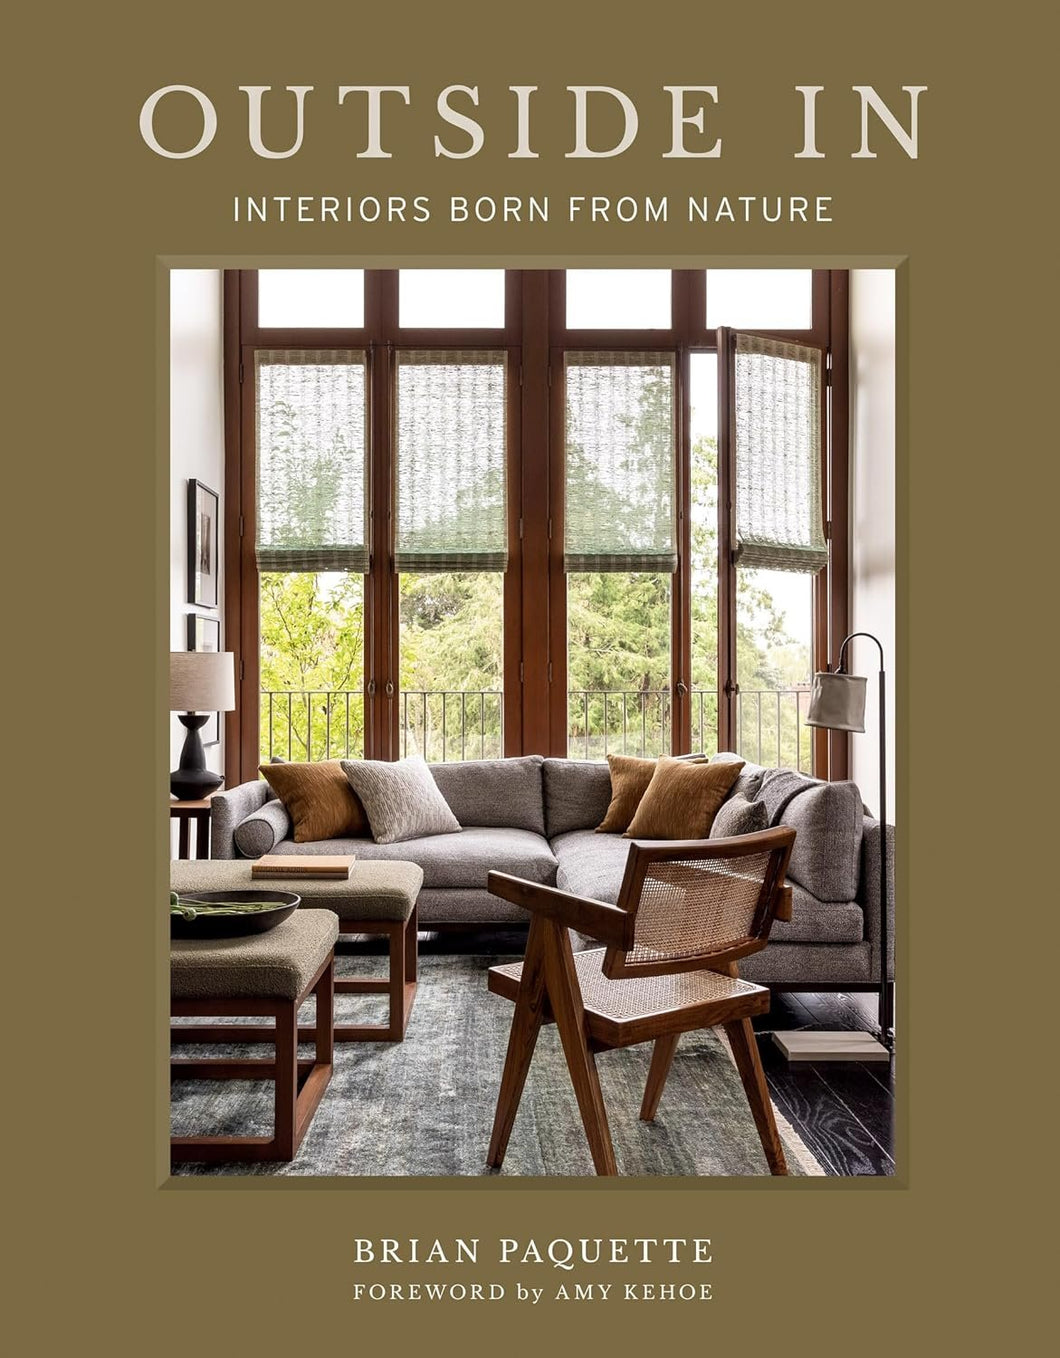 OUTSIDE IN - INTERIORS BORN FROM NATURE